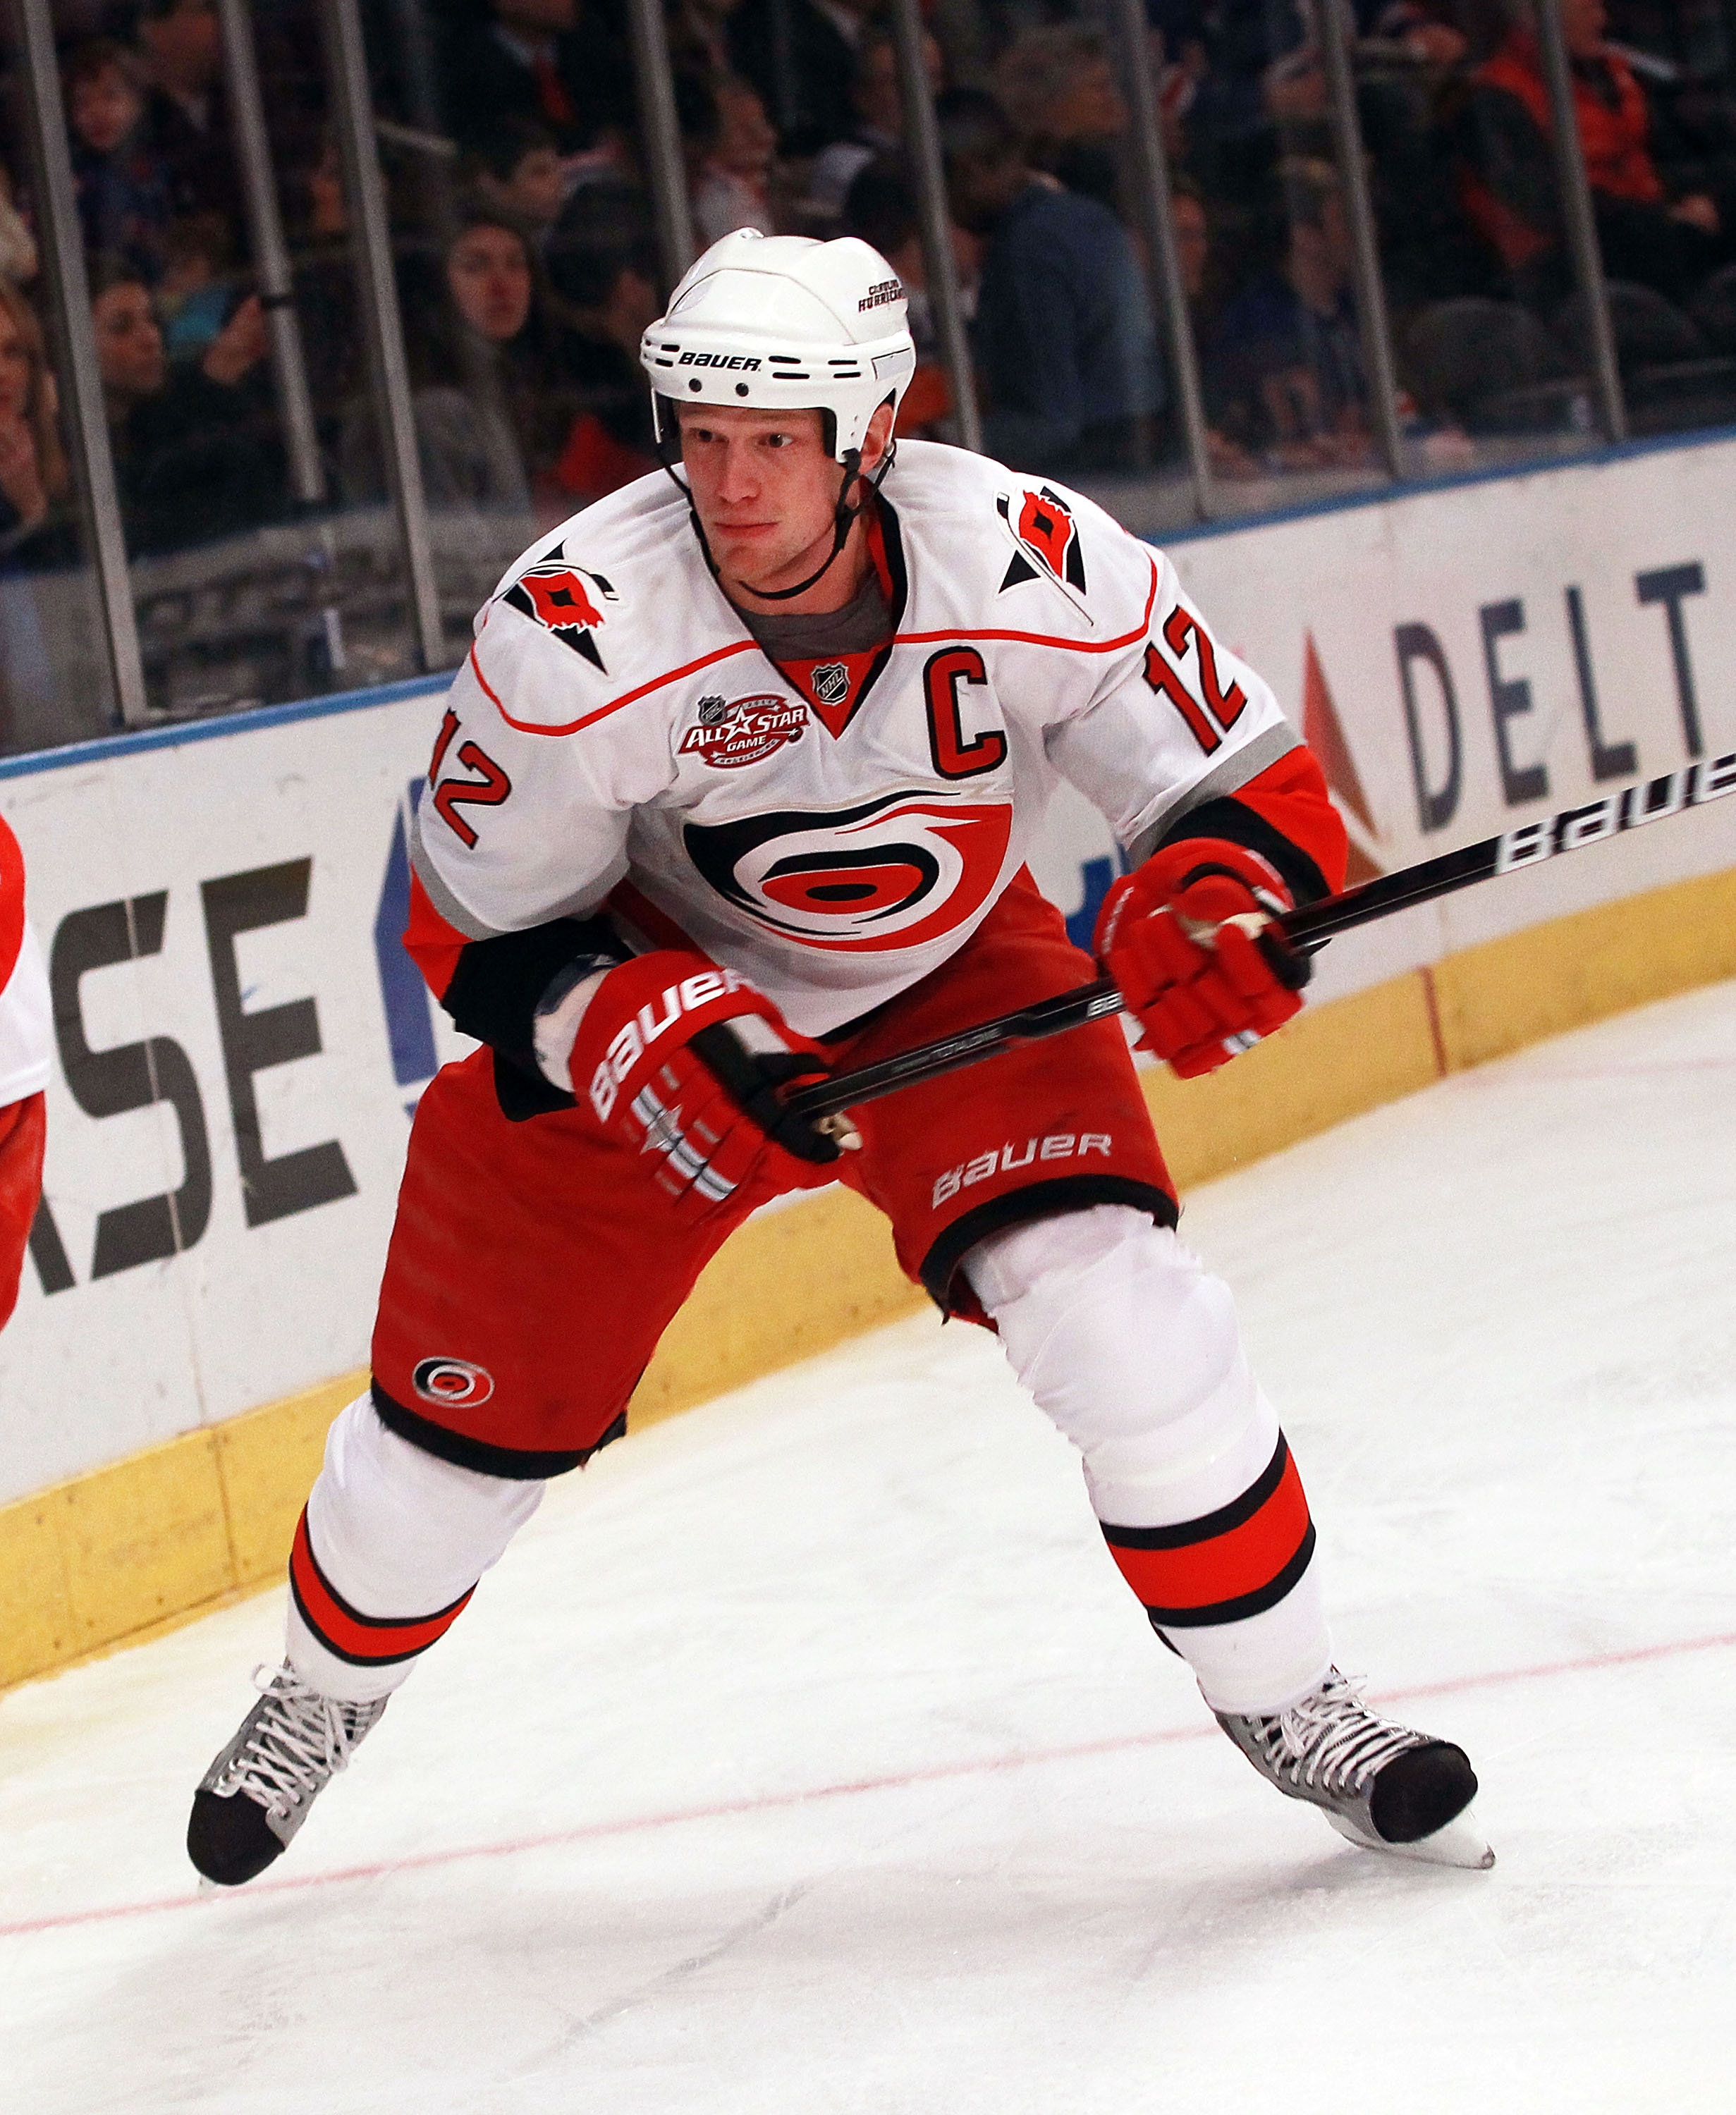 Eric Staal Hockey Stats and Profile at